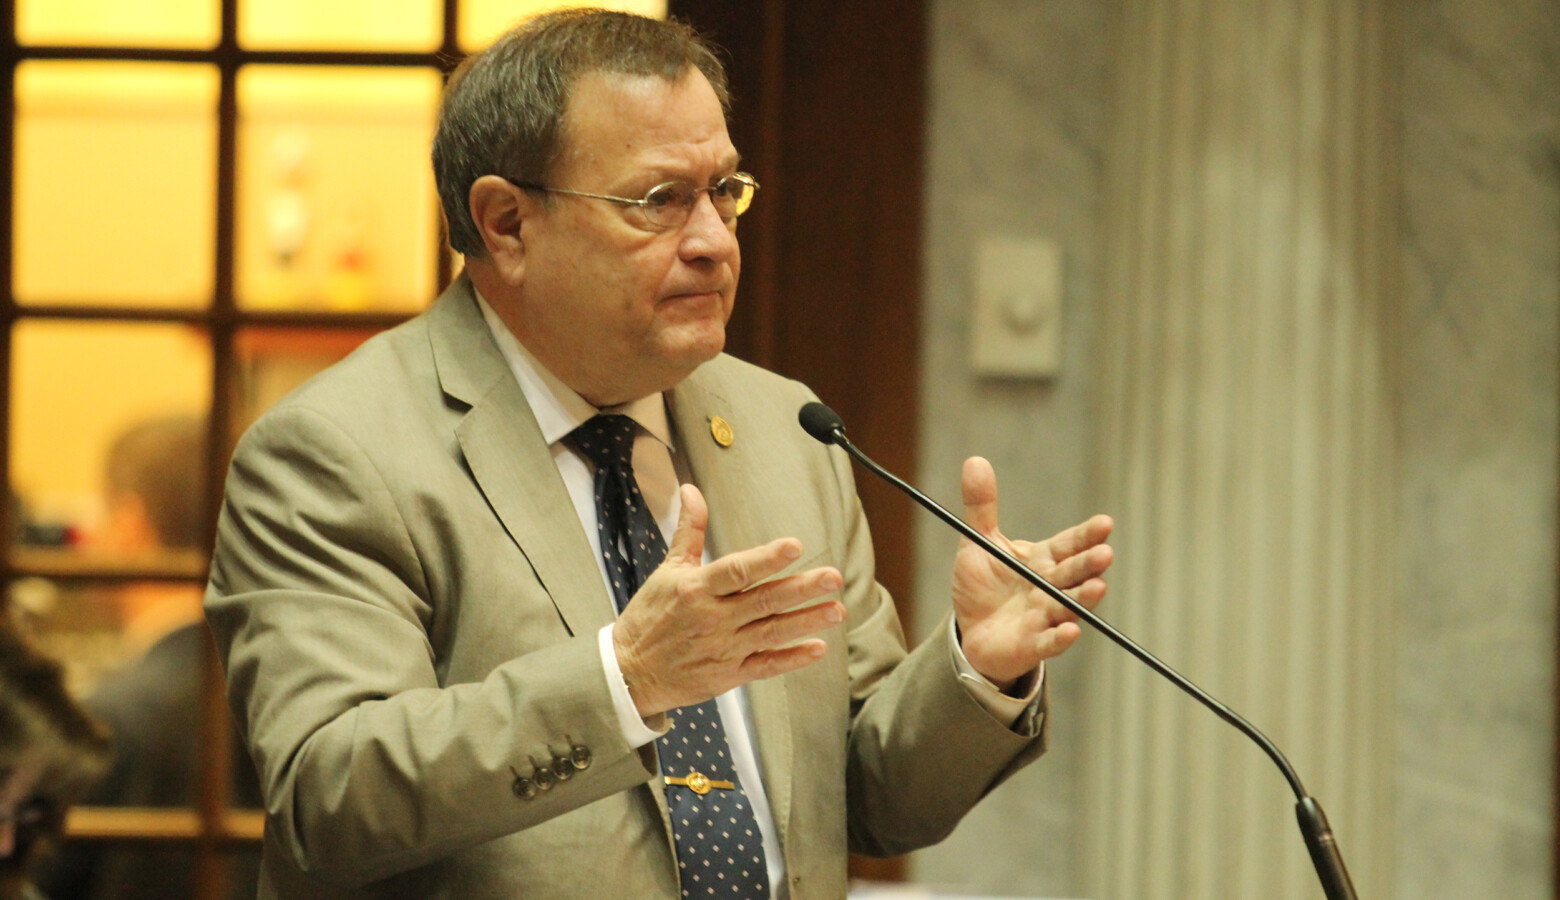 Sen. Mike Young (R-Indianapolis) claims his bill is not about the Marion County prosecutor's decision not to charge people for simple marijuana possession. (Lauren Chapman/IPB News)